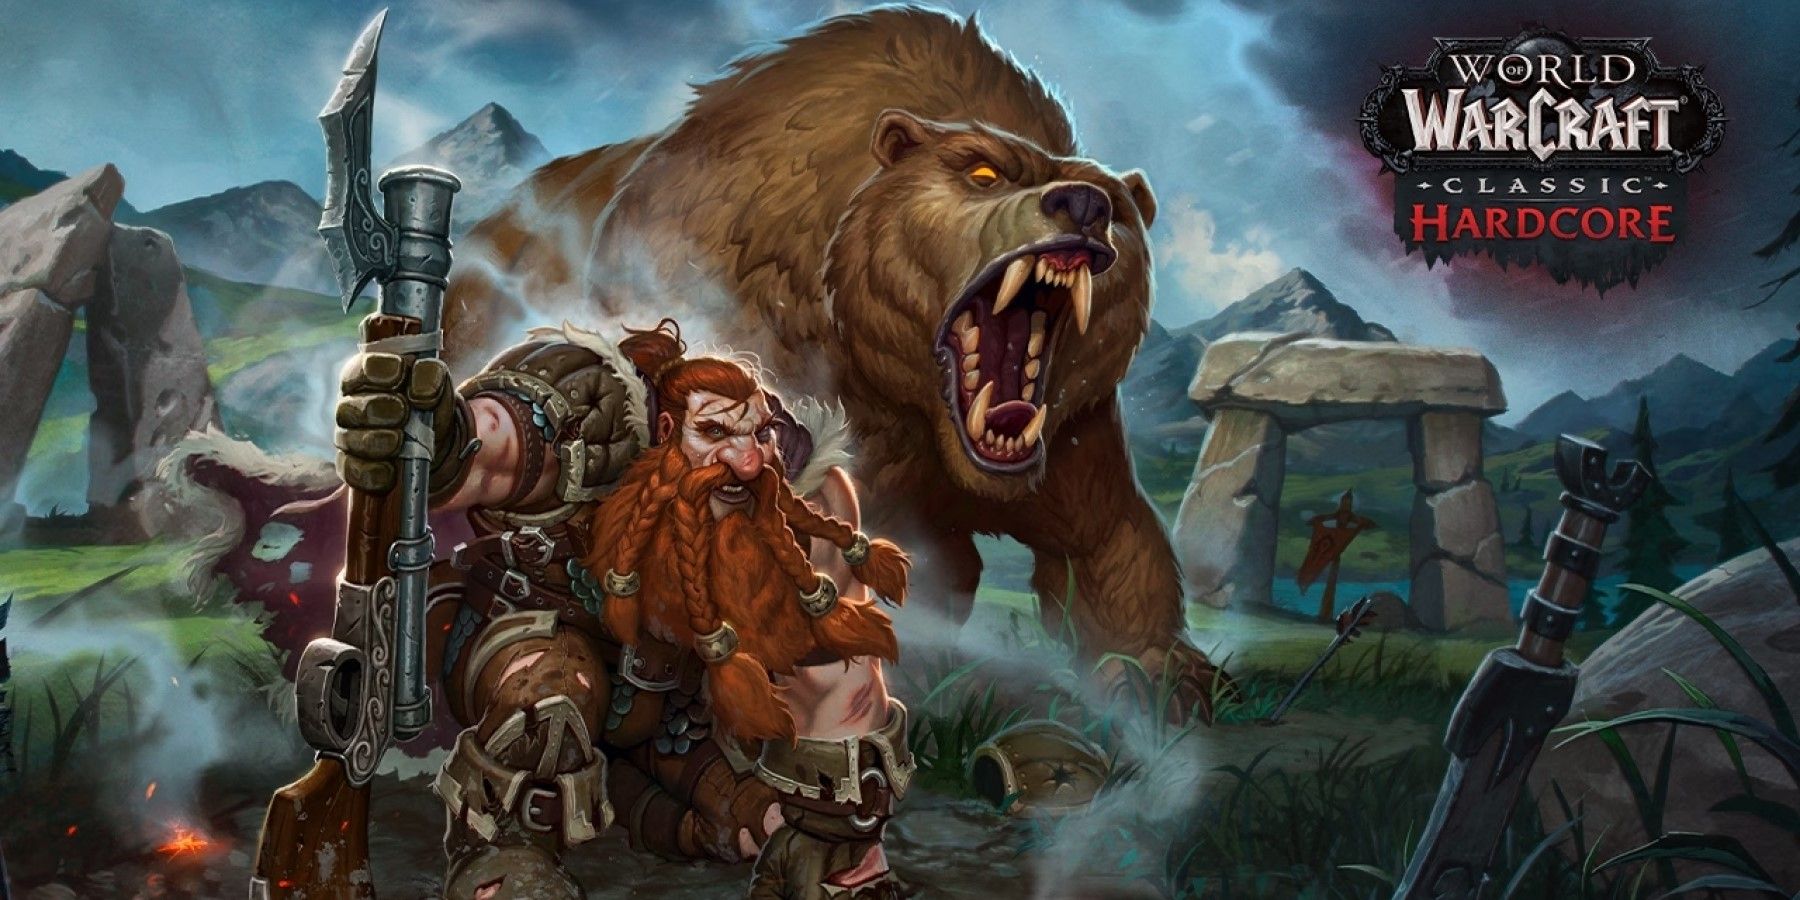 a dwarf rifleman and a bear alone in the wilds from wow classic hardcore